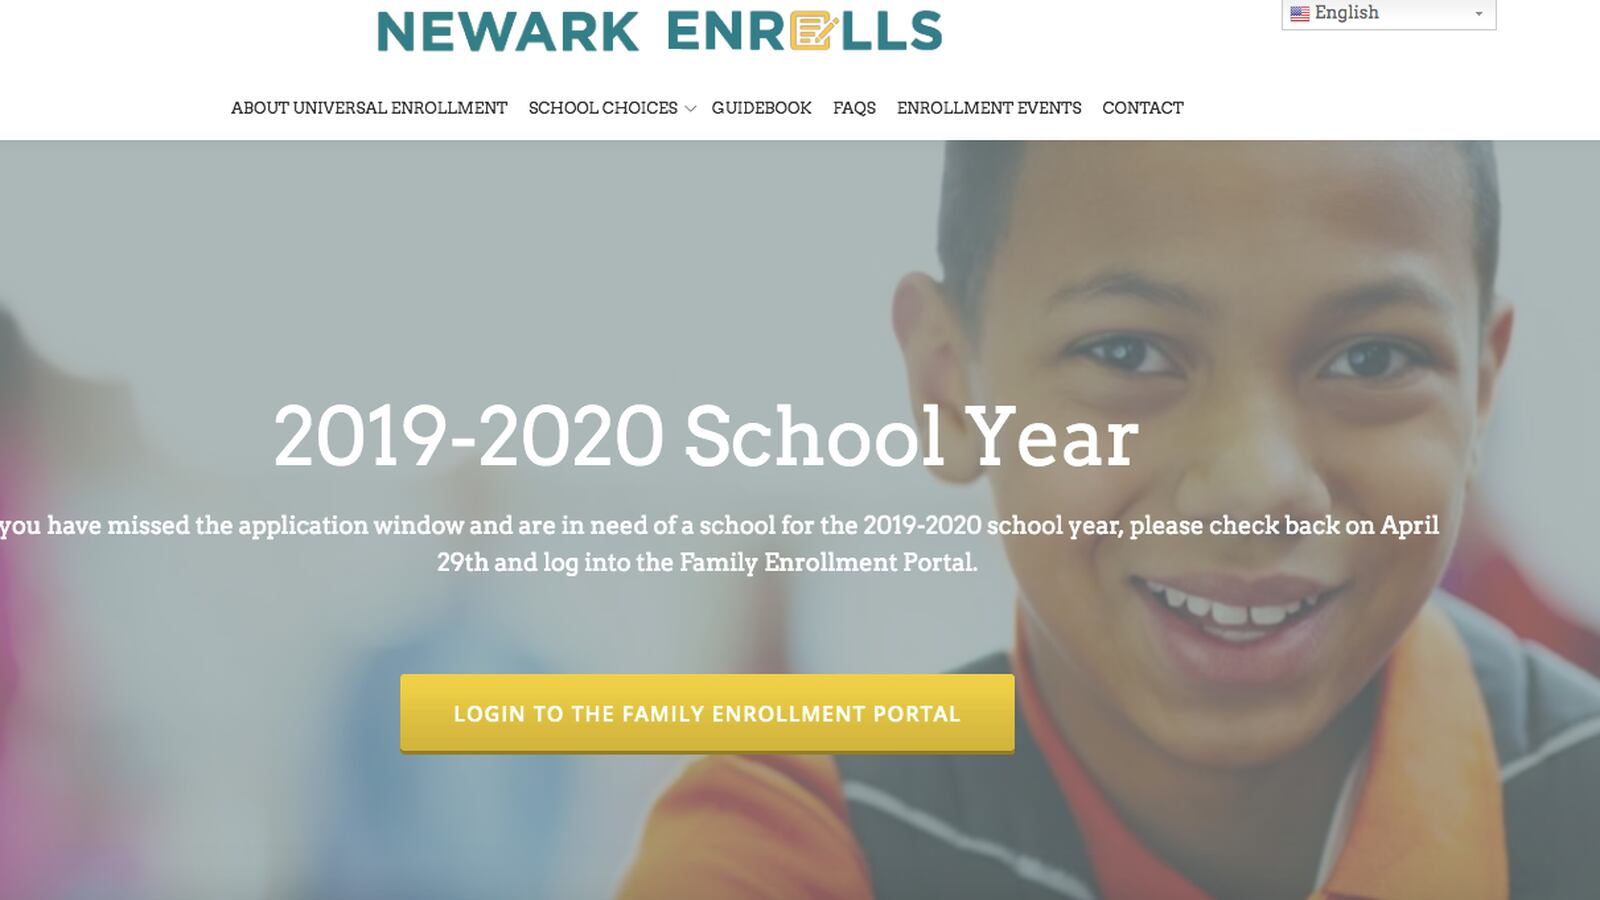 Families received their school matches for 2019-20 last weekend. Starting April 29, they will be able to search for alternative placements.